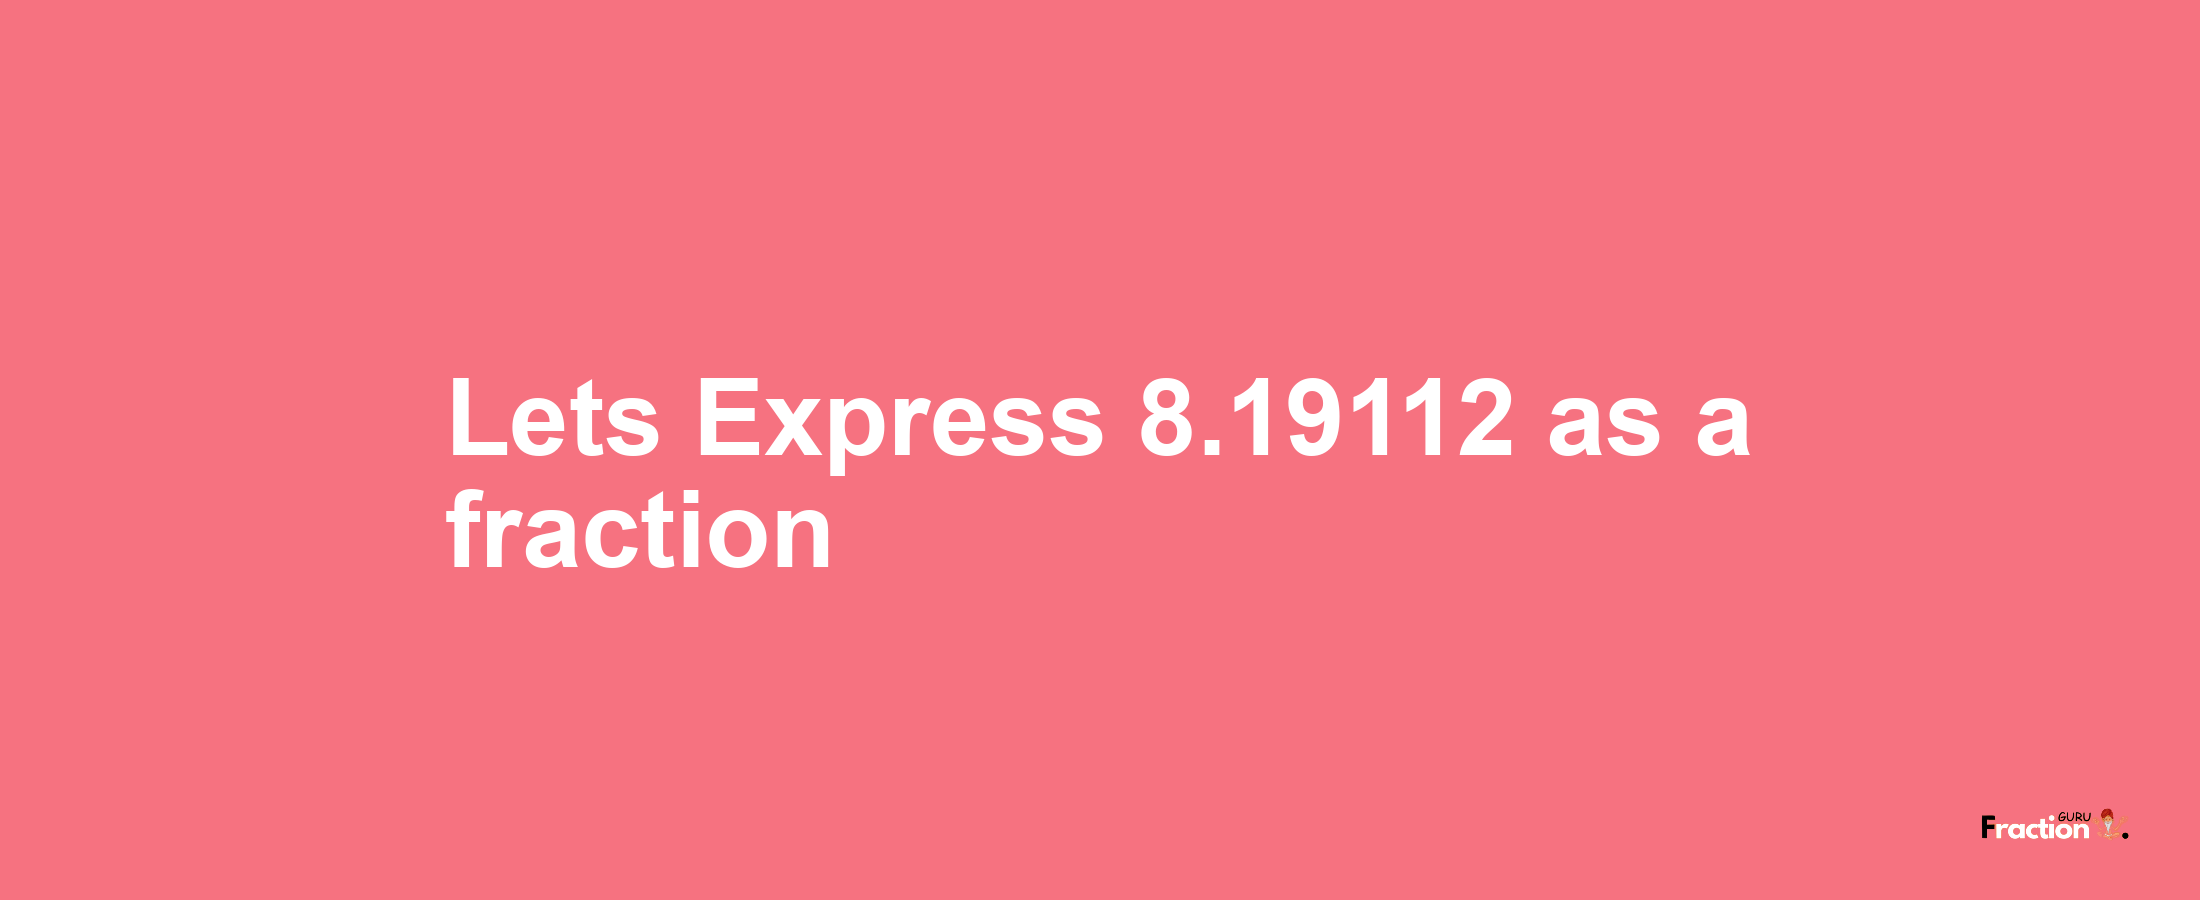 Lets Express 8.19112 as afraction